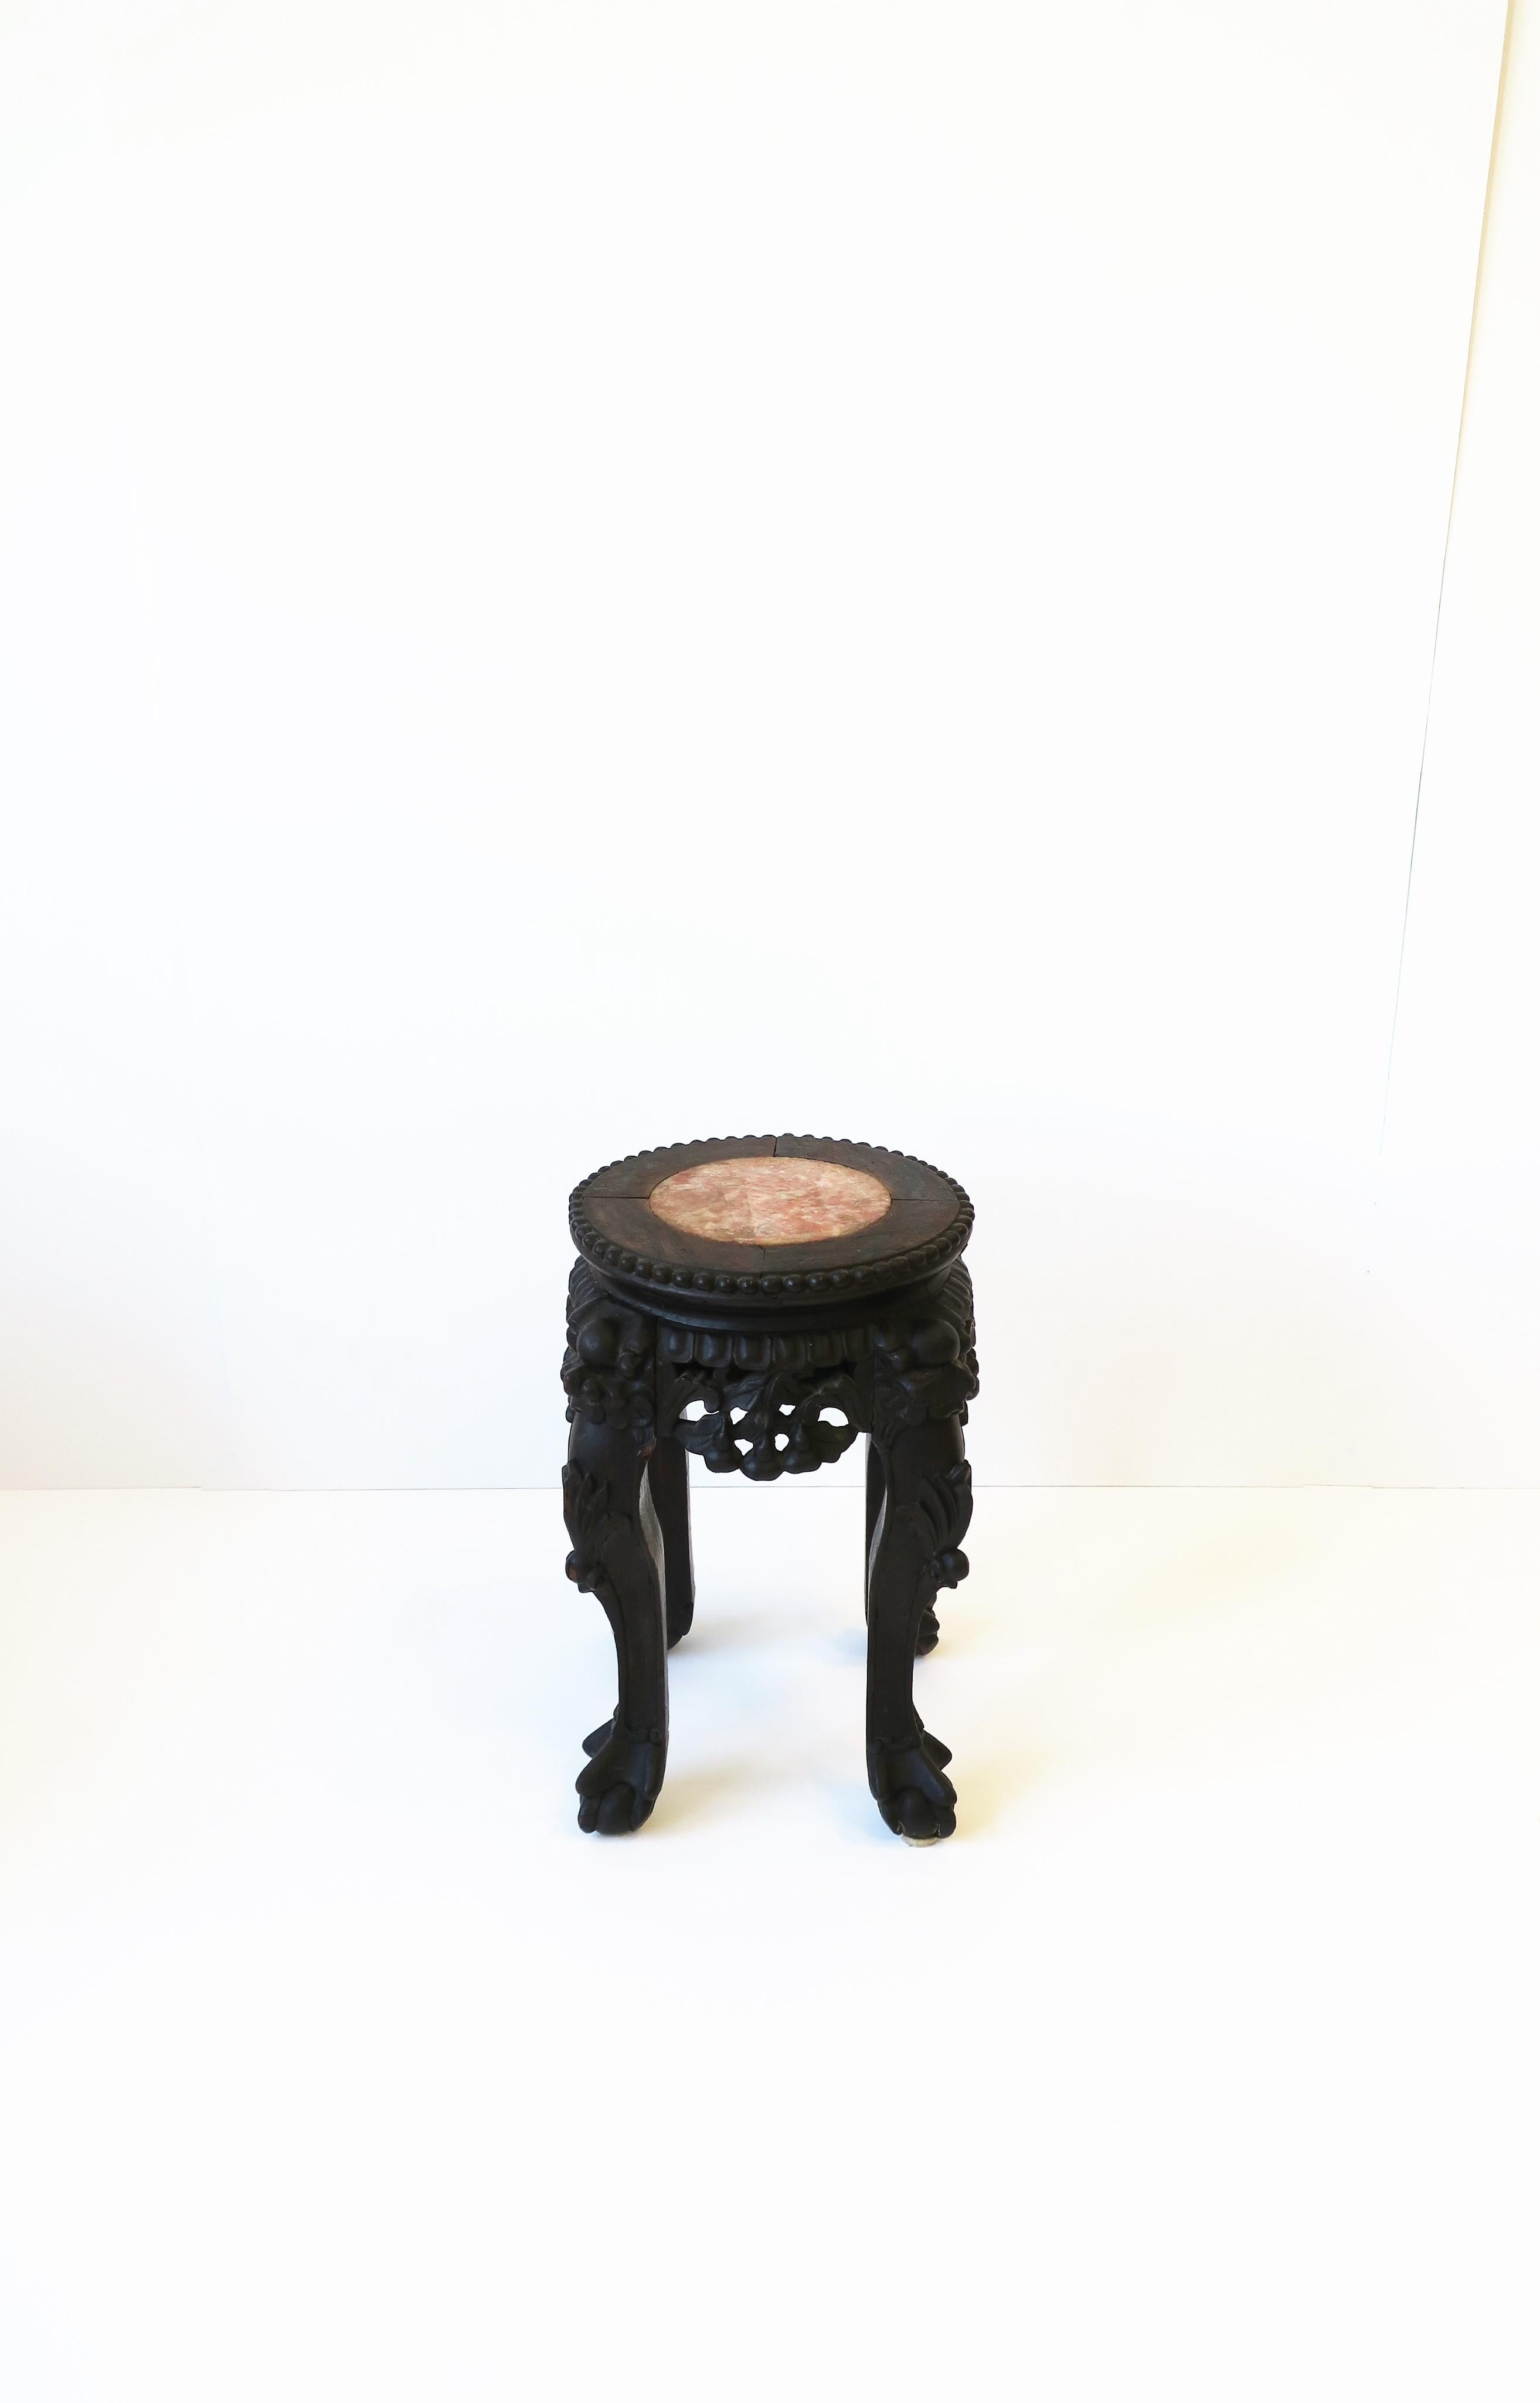 A Chinese carved hardwood table or stand with a rose marble top, circa late-19th century to early-20th century, China. Piece is a rich dark brown carved hardwood with ball and claw feet and a rose marble top. A great piece to hold a cocktail, a